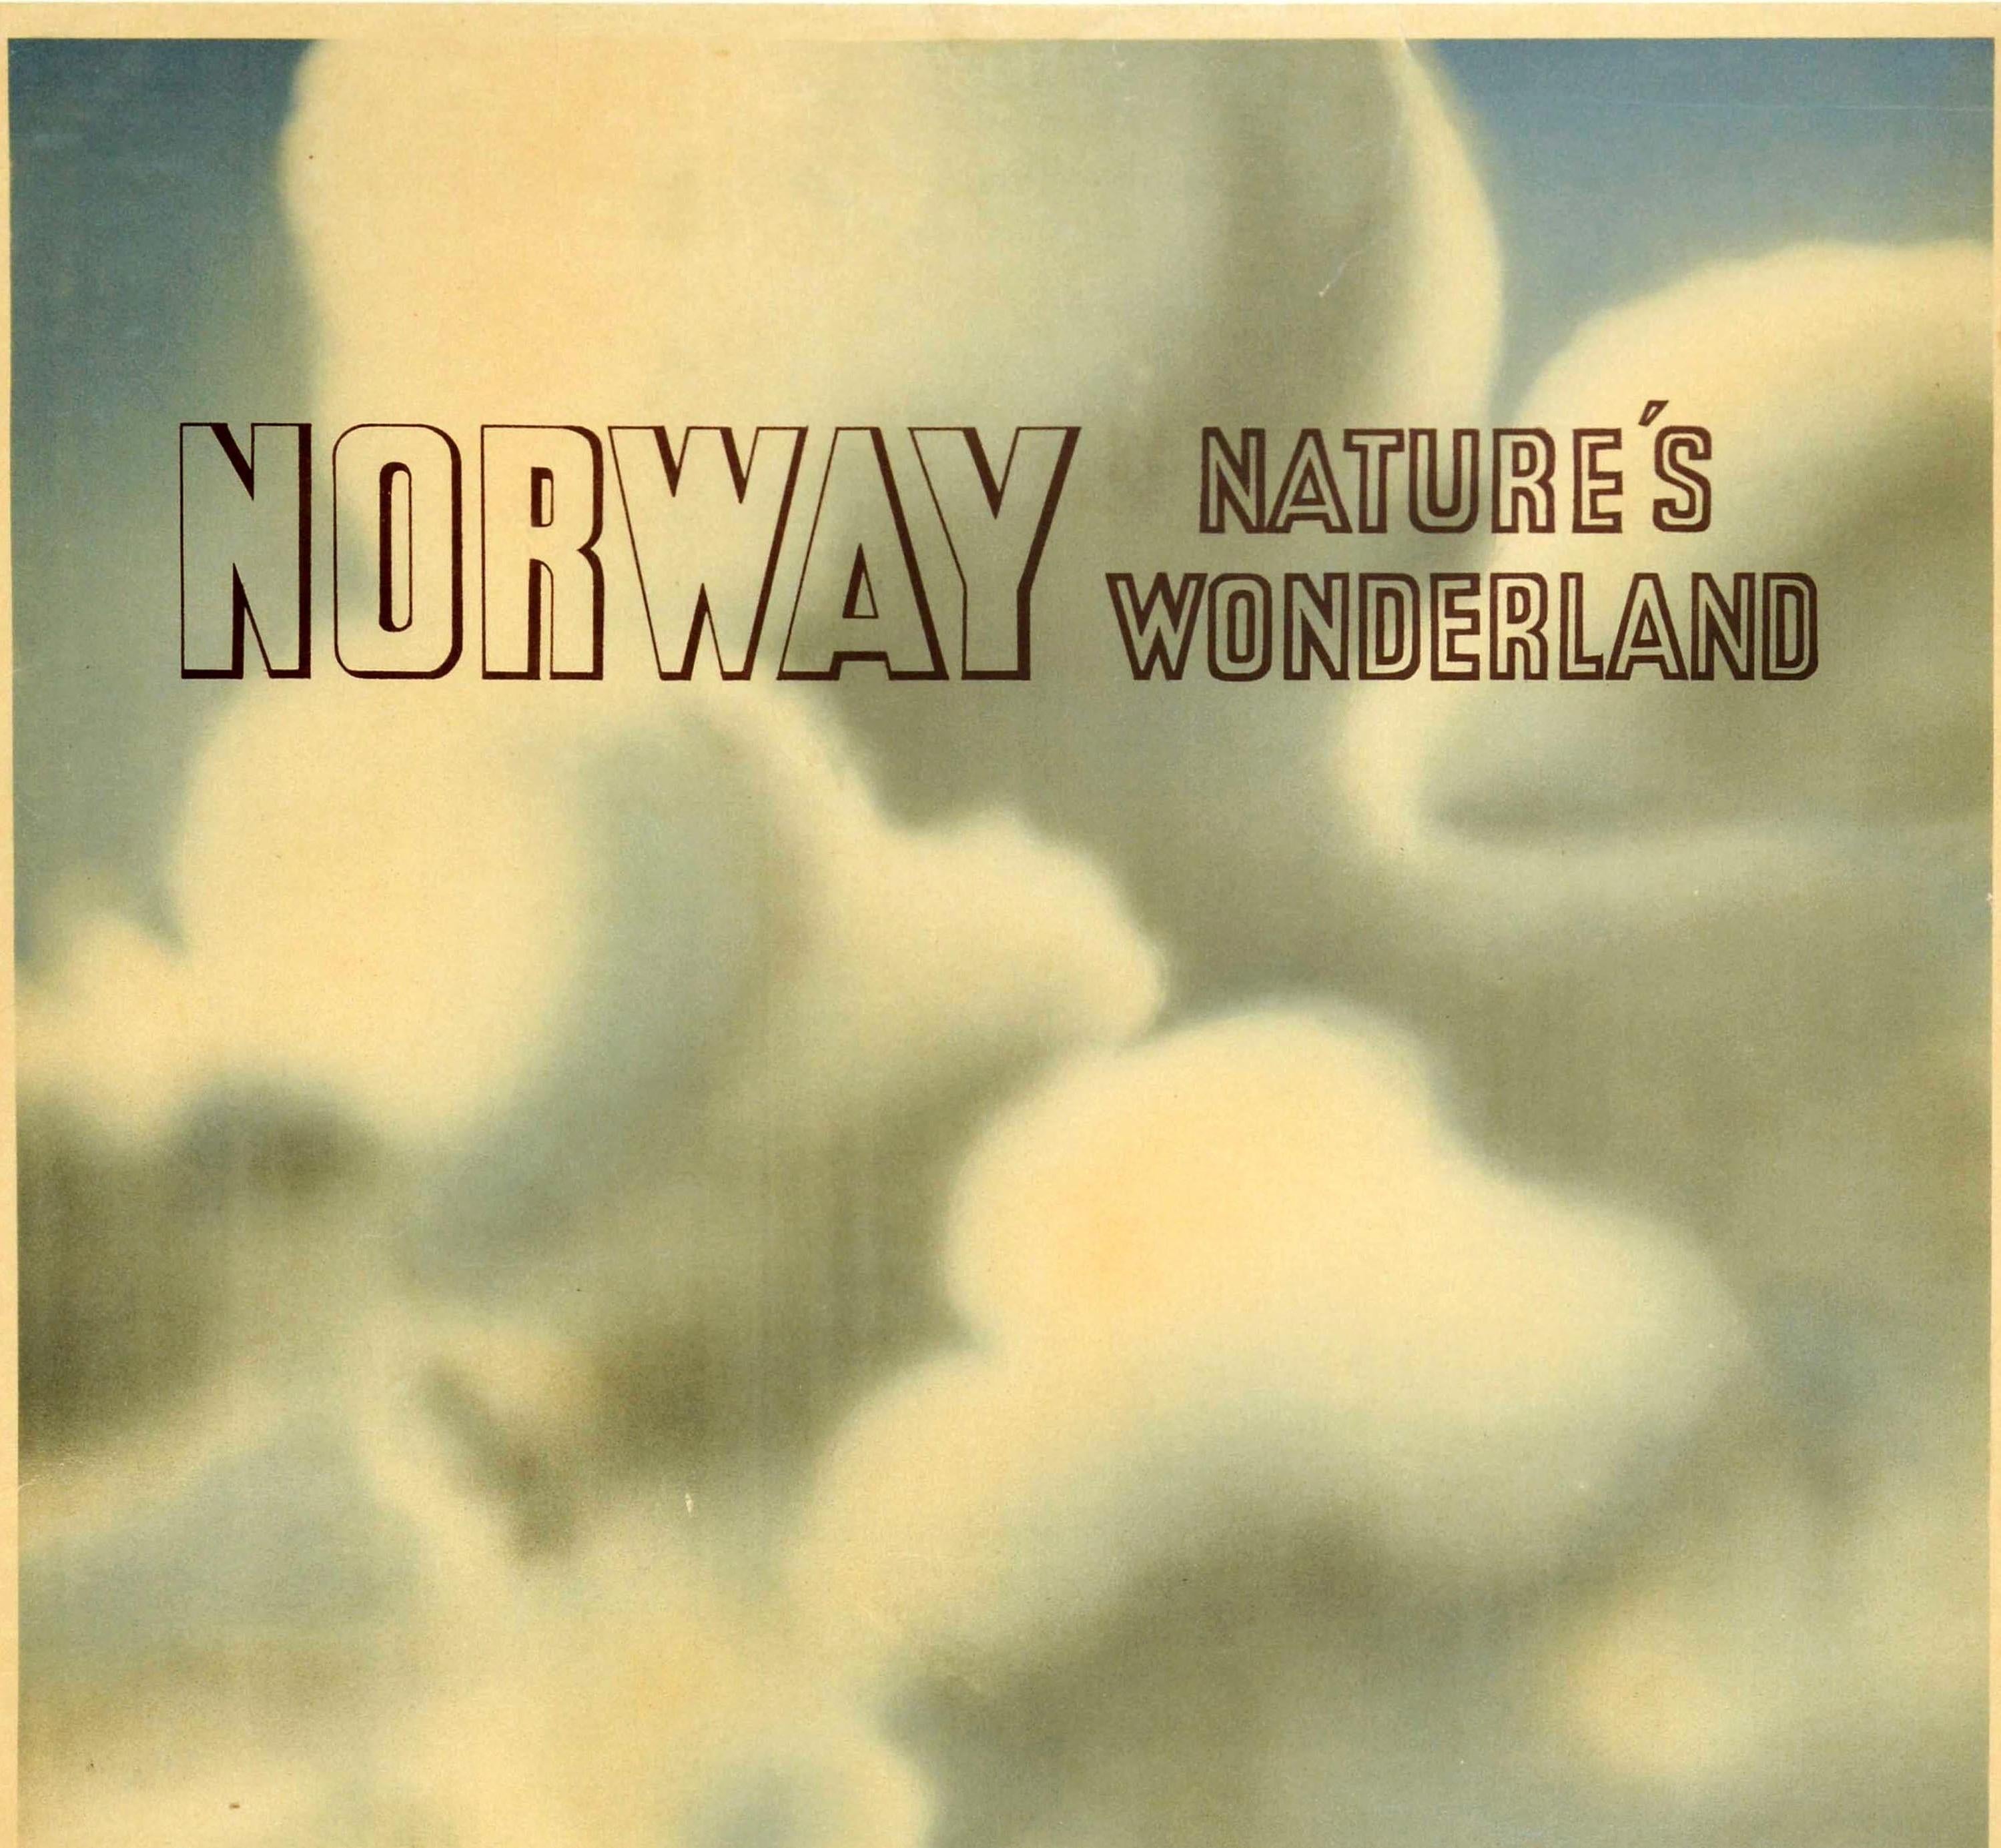 Original vintage travel poster for Norway Nature's Wonderland featuring a scenic image of a couple on top of a hill pointing to trees and mountains in the distance with the stylized lettering above in front of clouds in the background. Published by